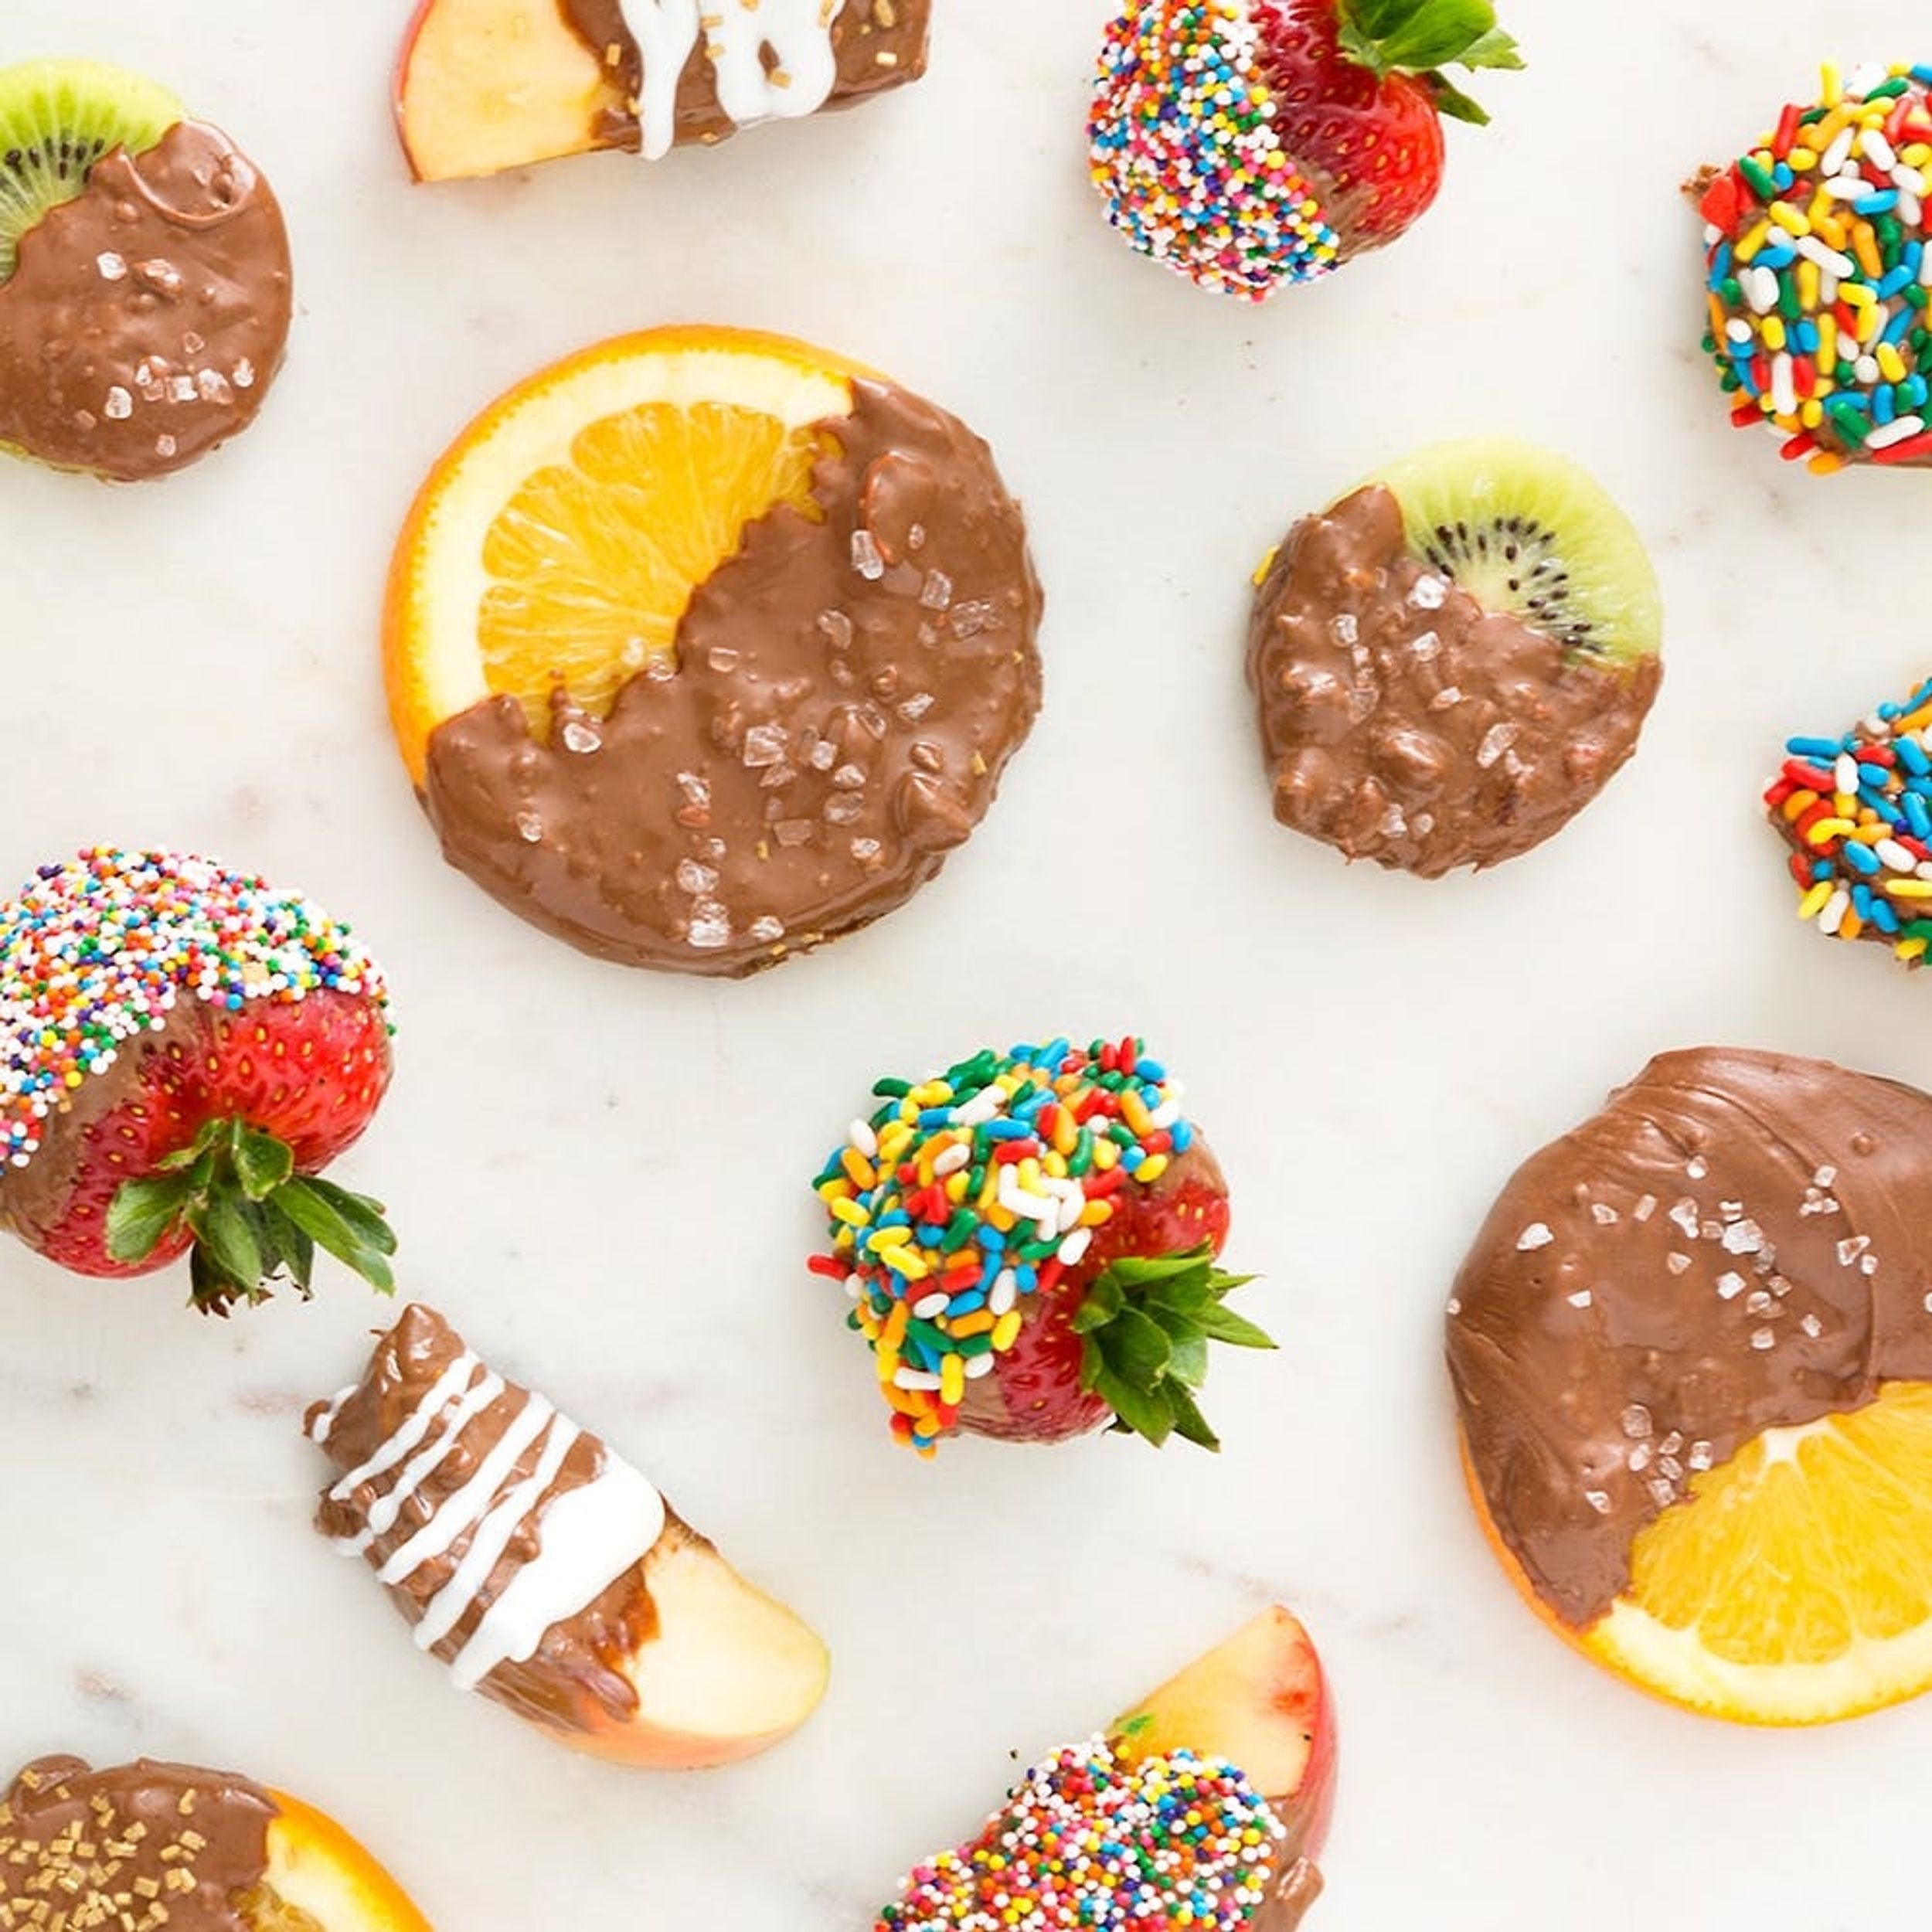 Turn Your Leftover Halloween Candy into Chocolate-Covered Fruit